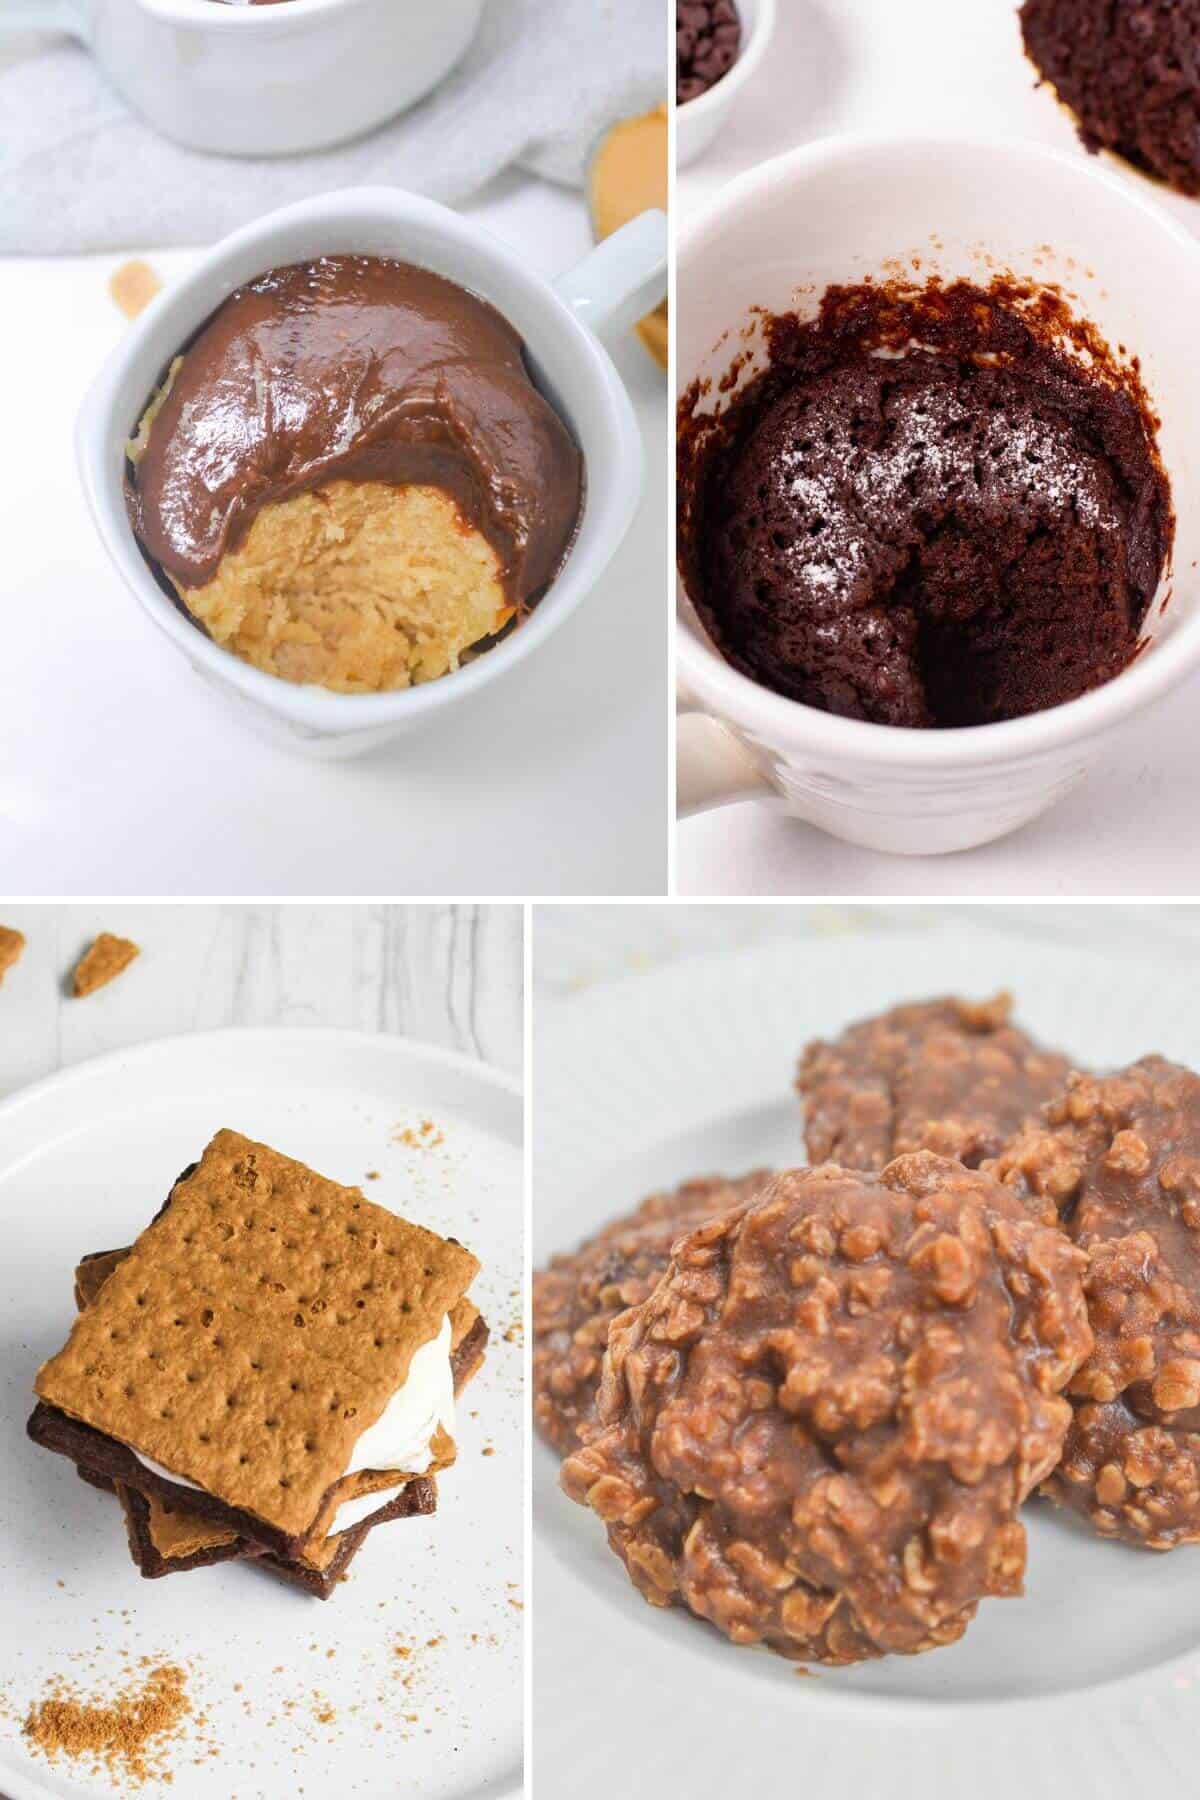 Collage of chocolate recipes.